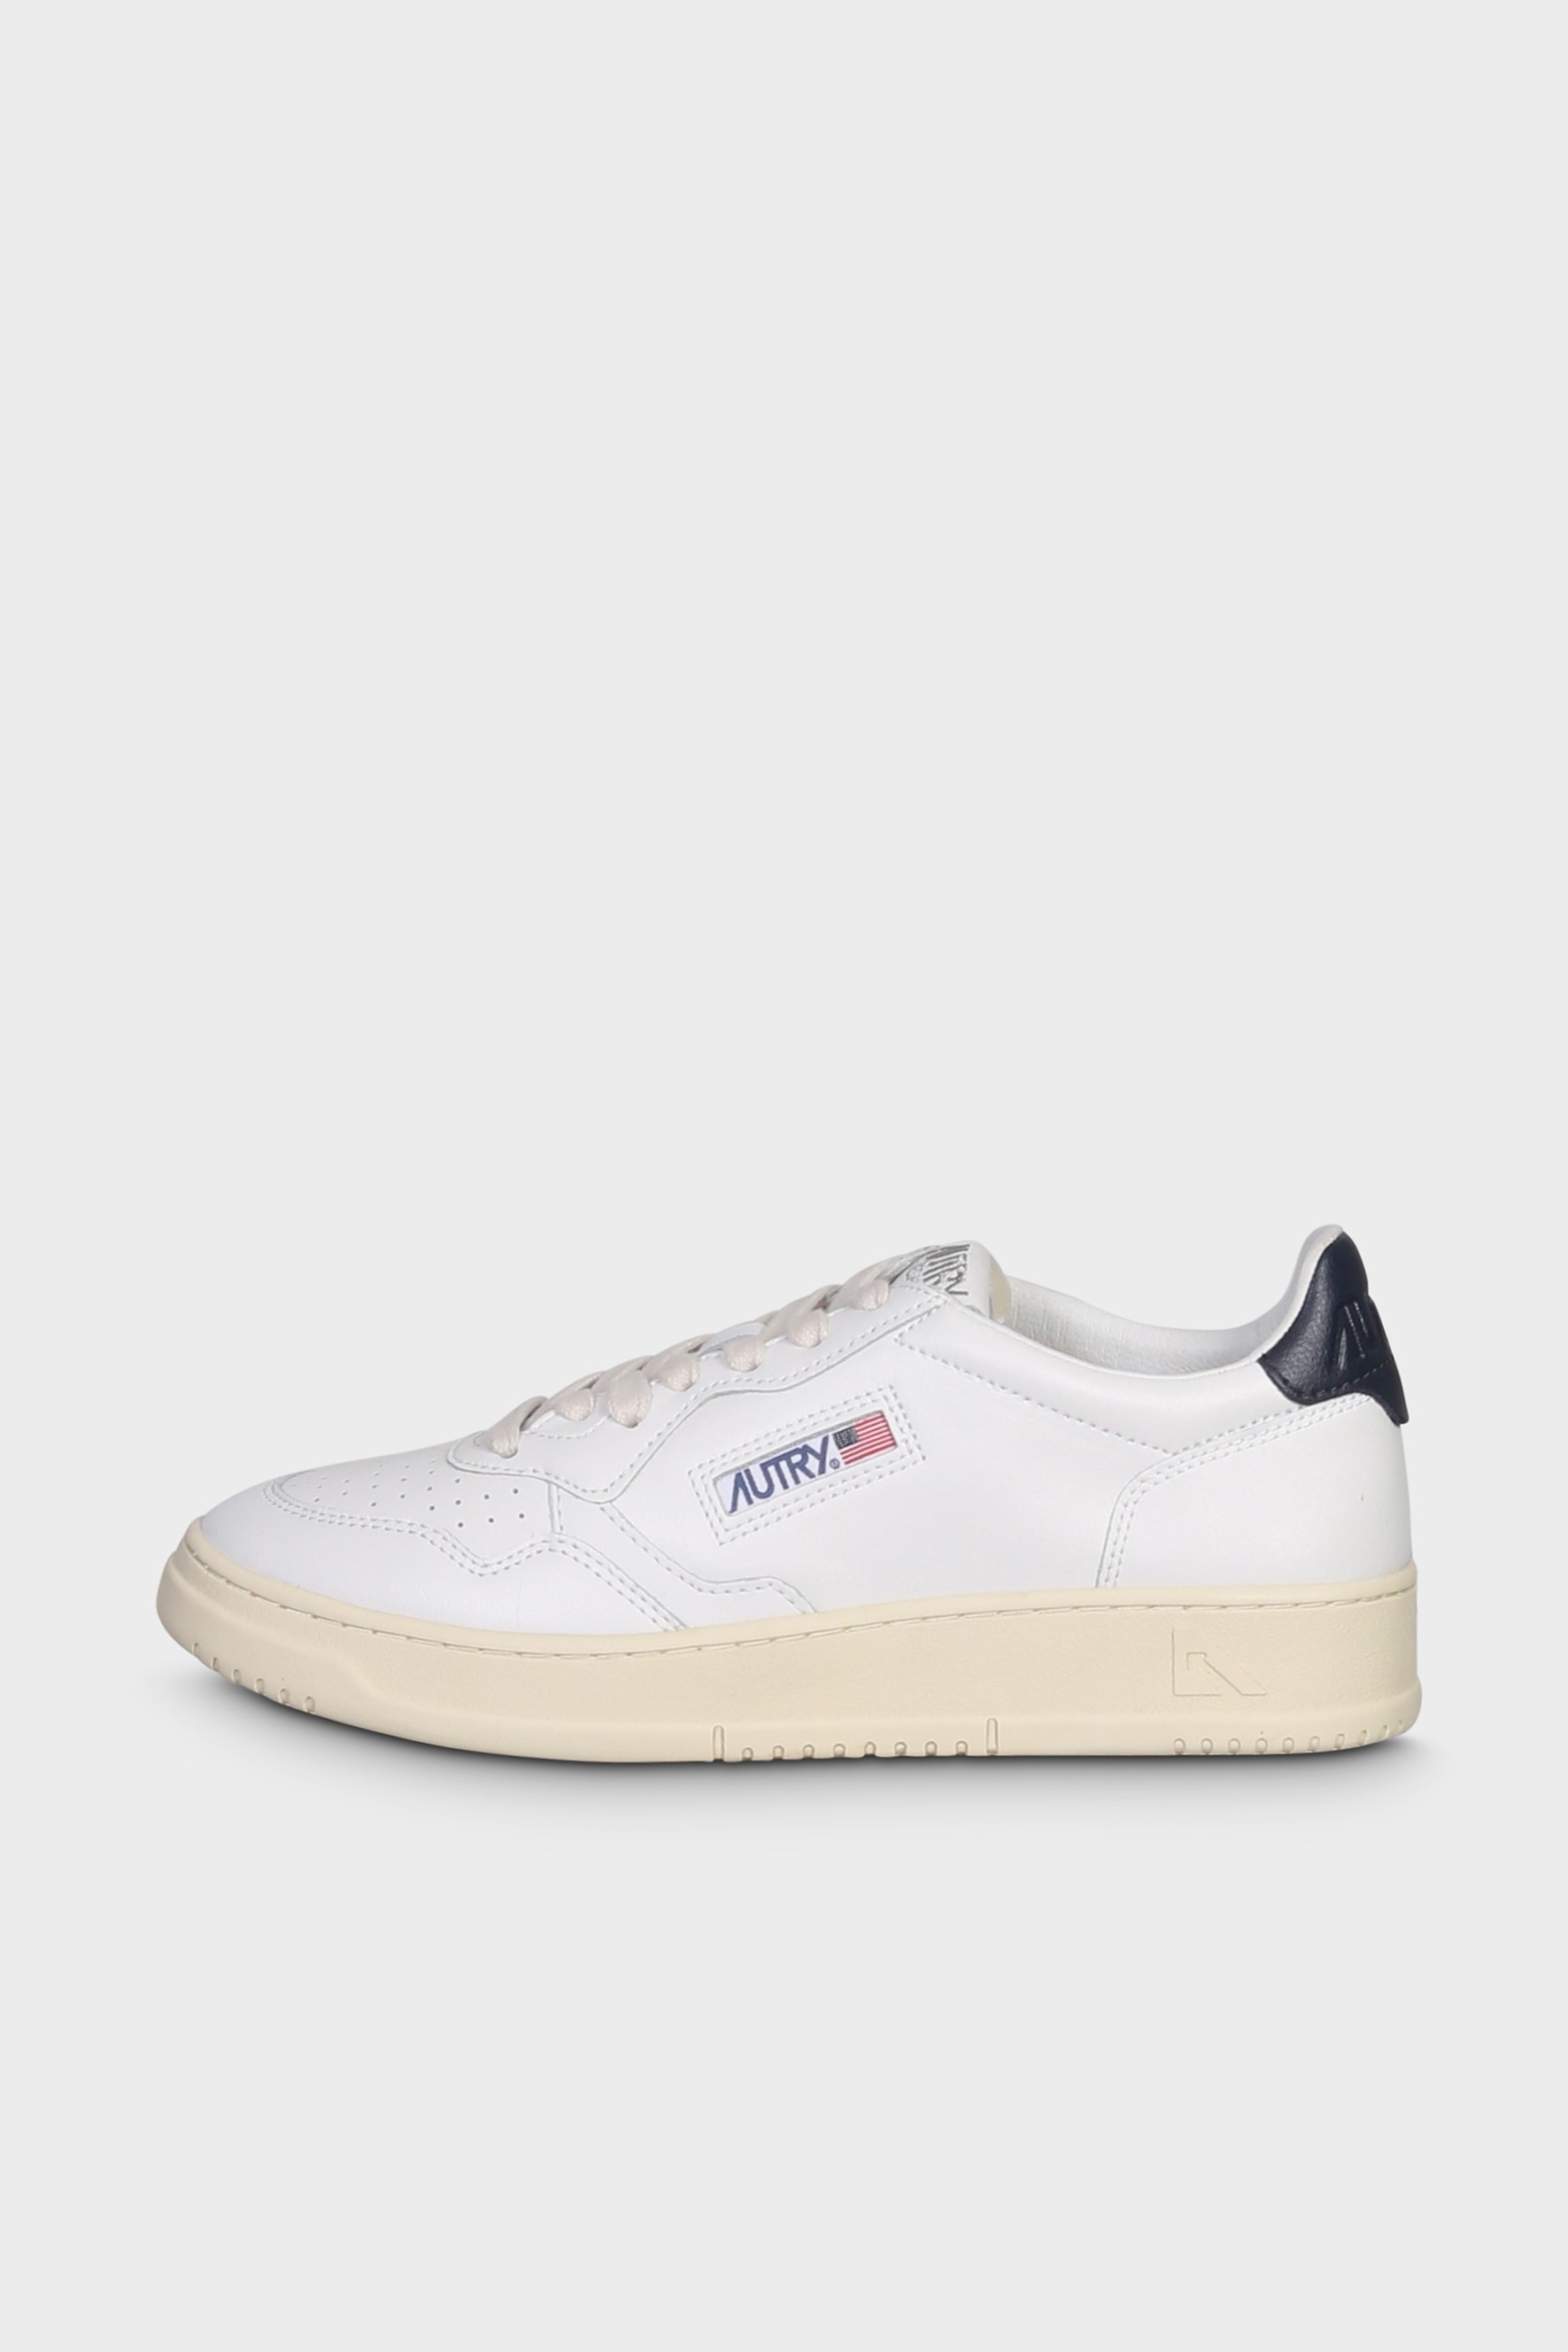 AUTRY ACTION SHOES Medalist Low Sneaker in White/Space